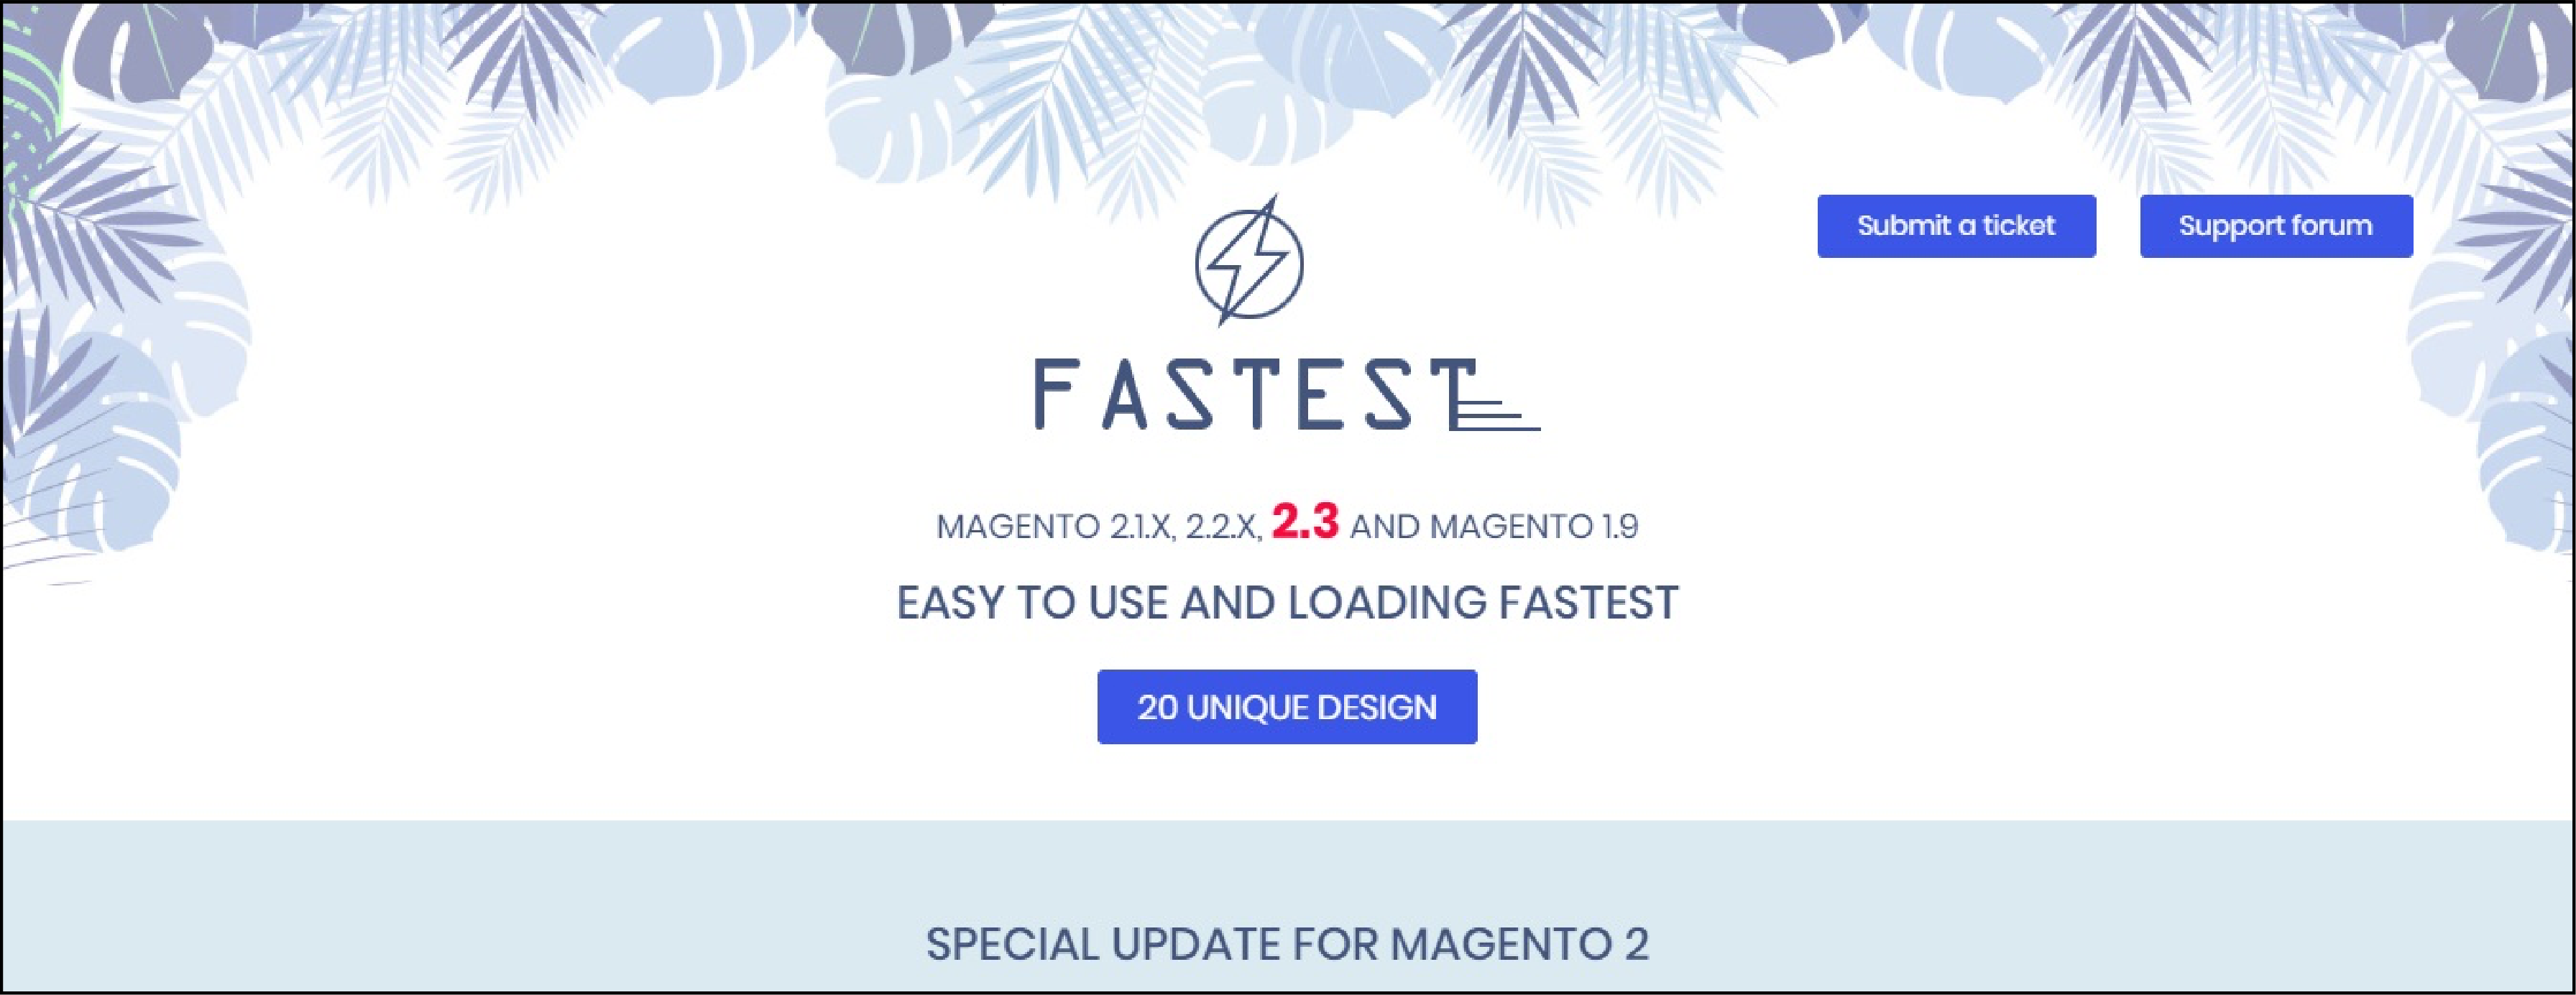 Best Magento Themes and Templates -Fastest Theme